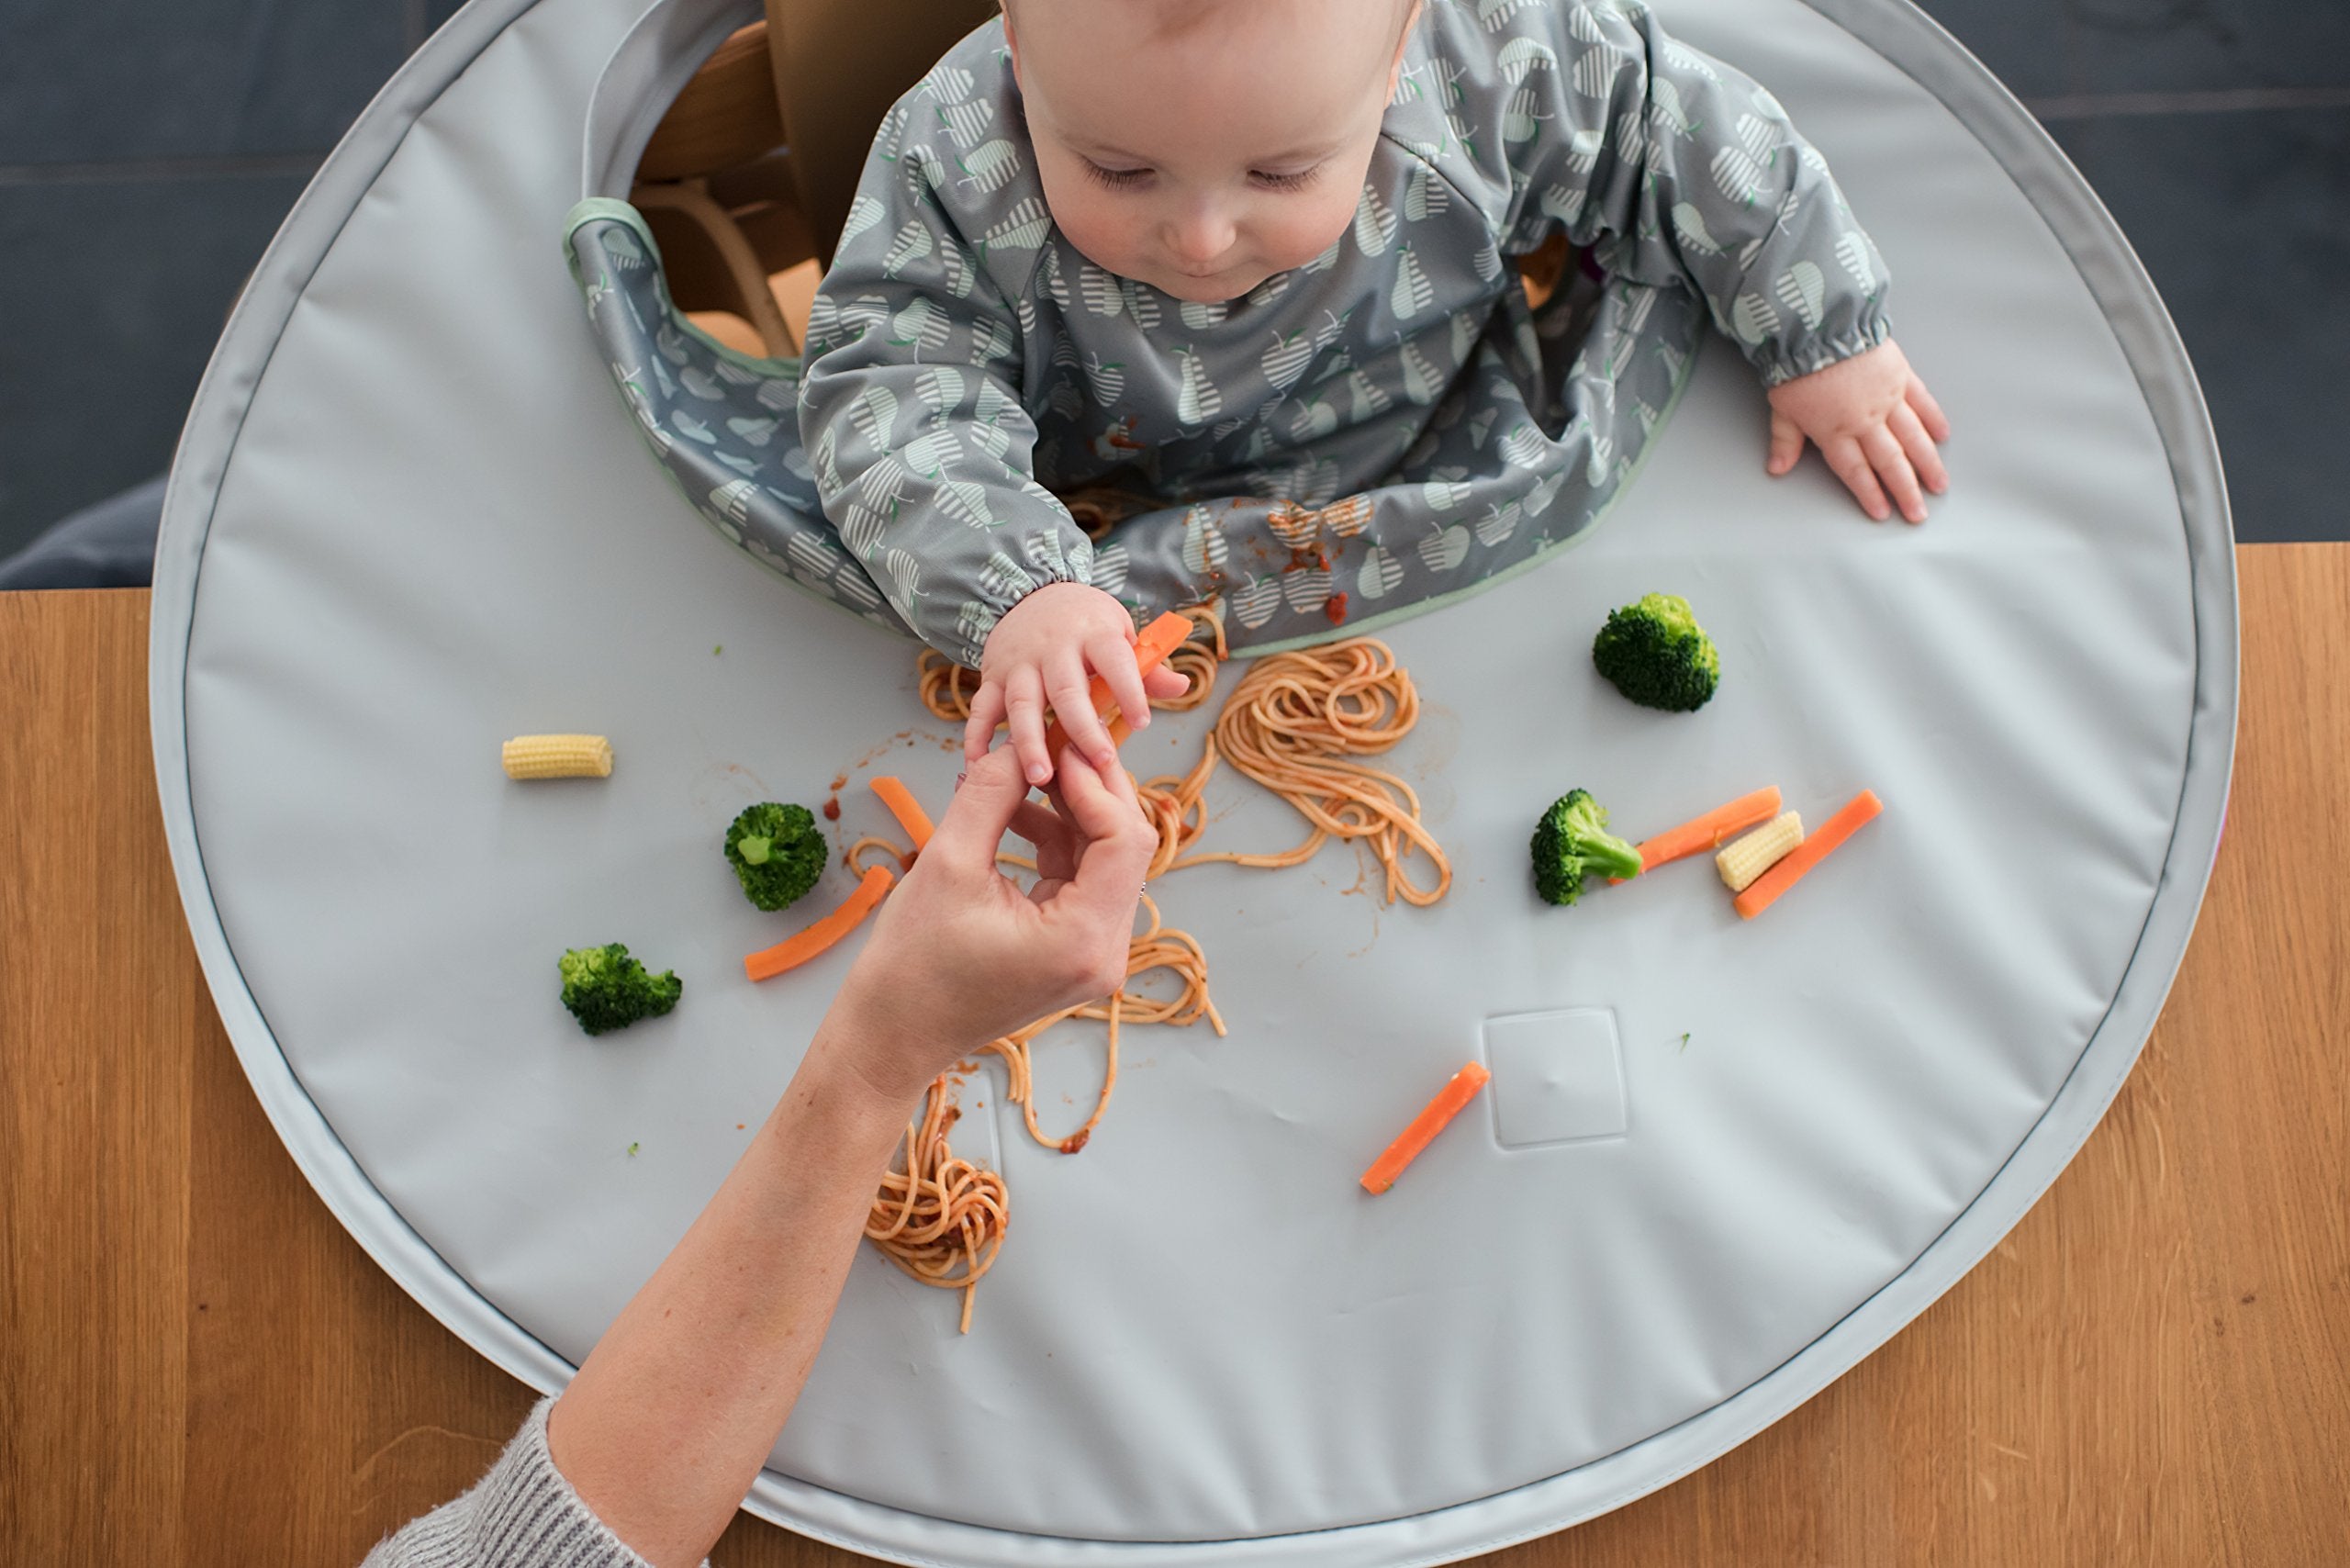 Little Dish - Friday Giveaway! Our friends at Tidy Tot have given us two of  their fabulous Tidy Tot and Tray Kits to give away today. The award winning Tidy  Tot Bib